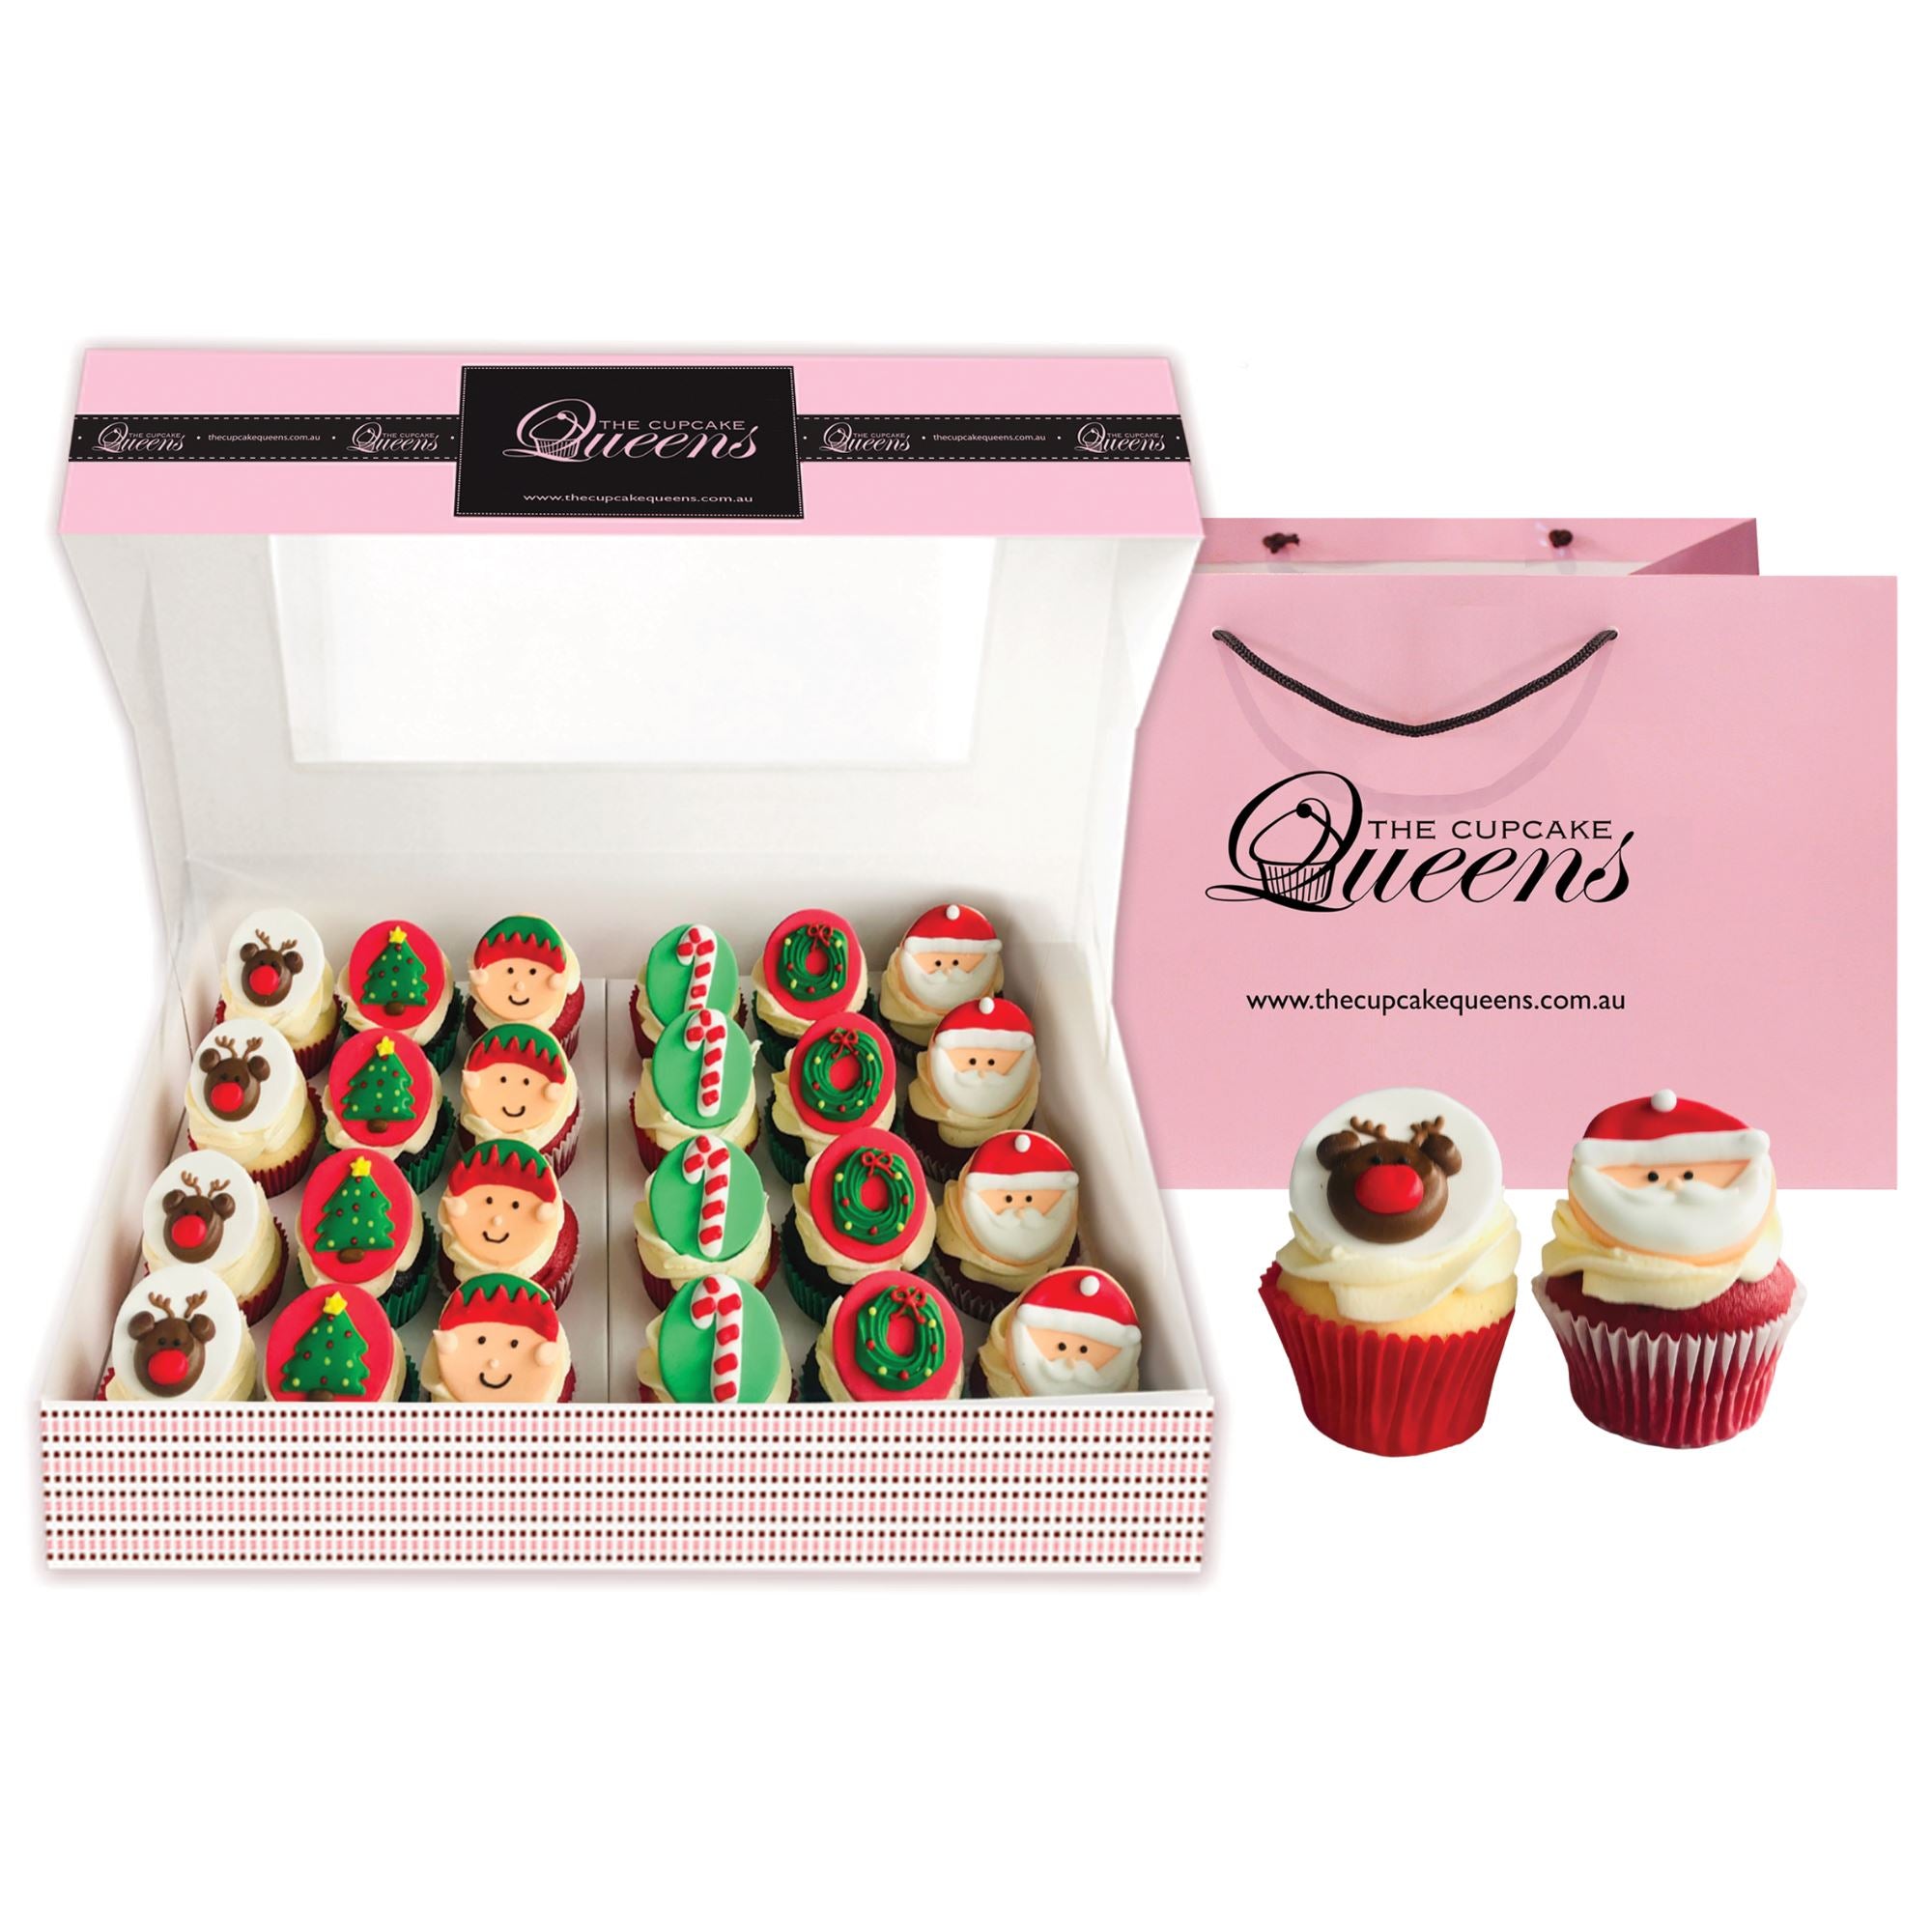 Santa's Favourites Mini Gift Box Cupcakes Pre Selected Boxes The Cupcake Queens 